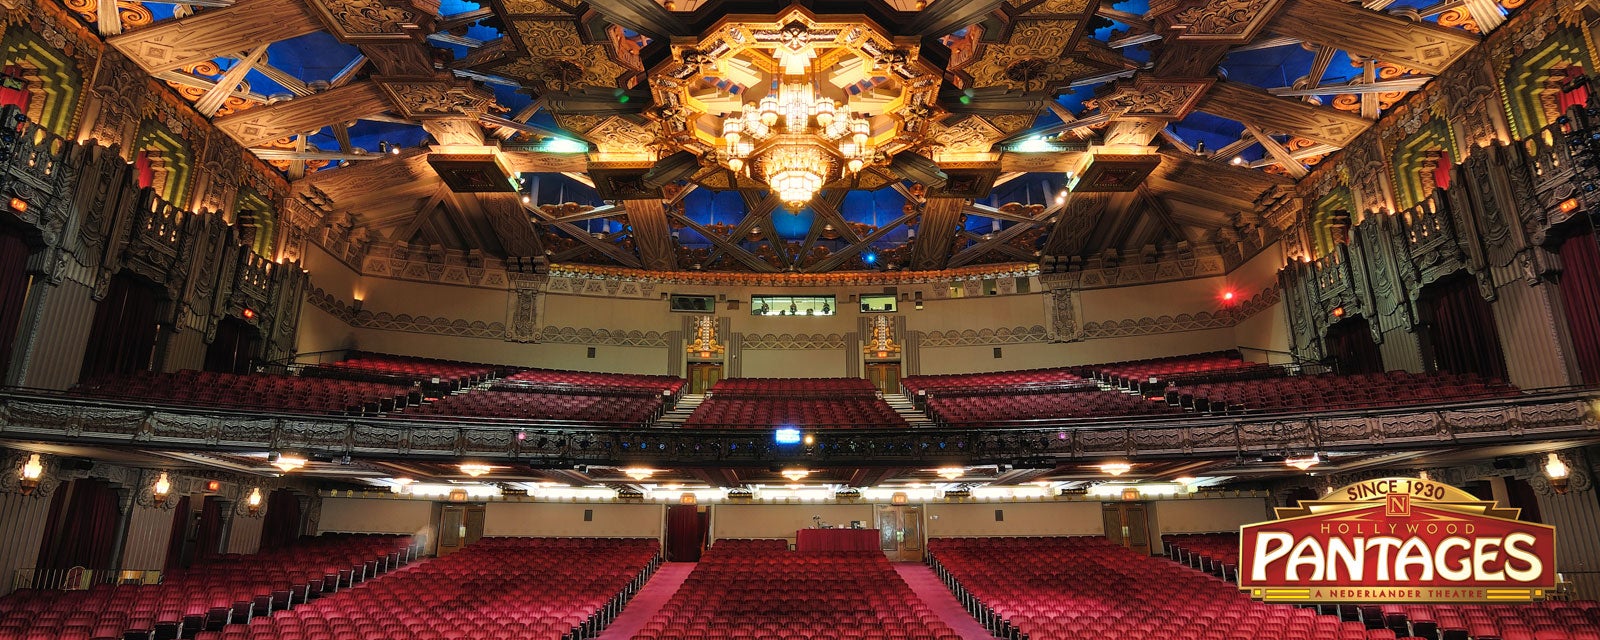 Pantages Theatre | Hollywood Pantages